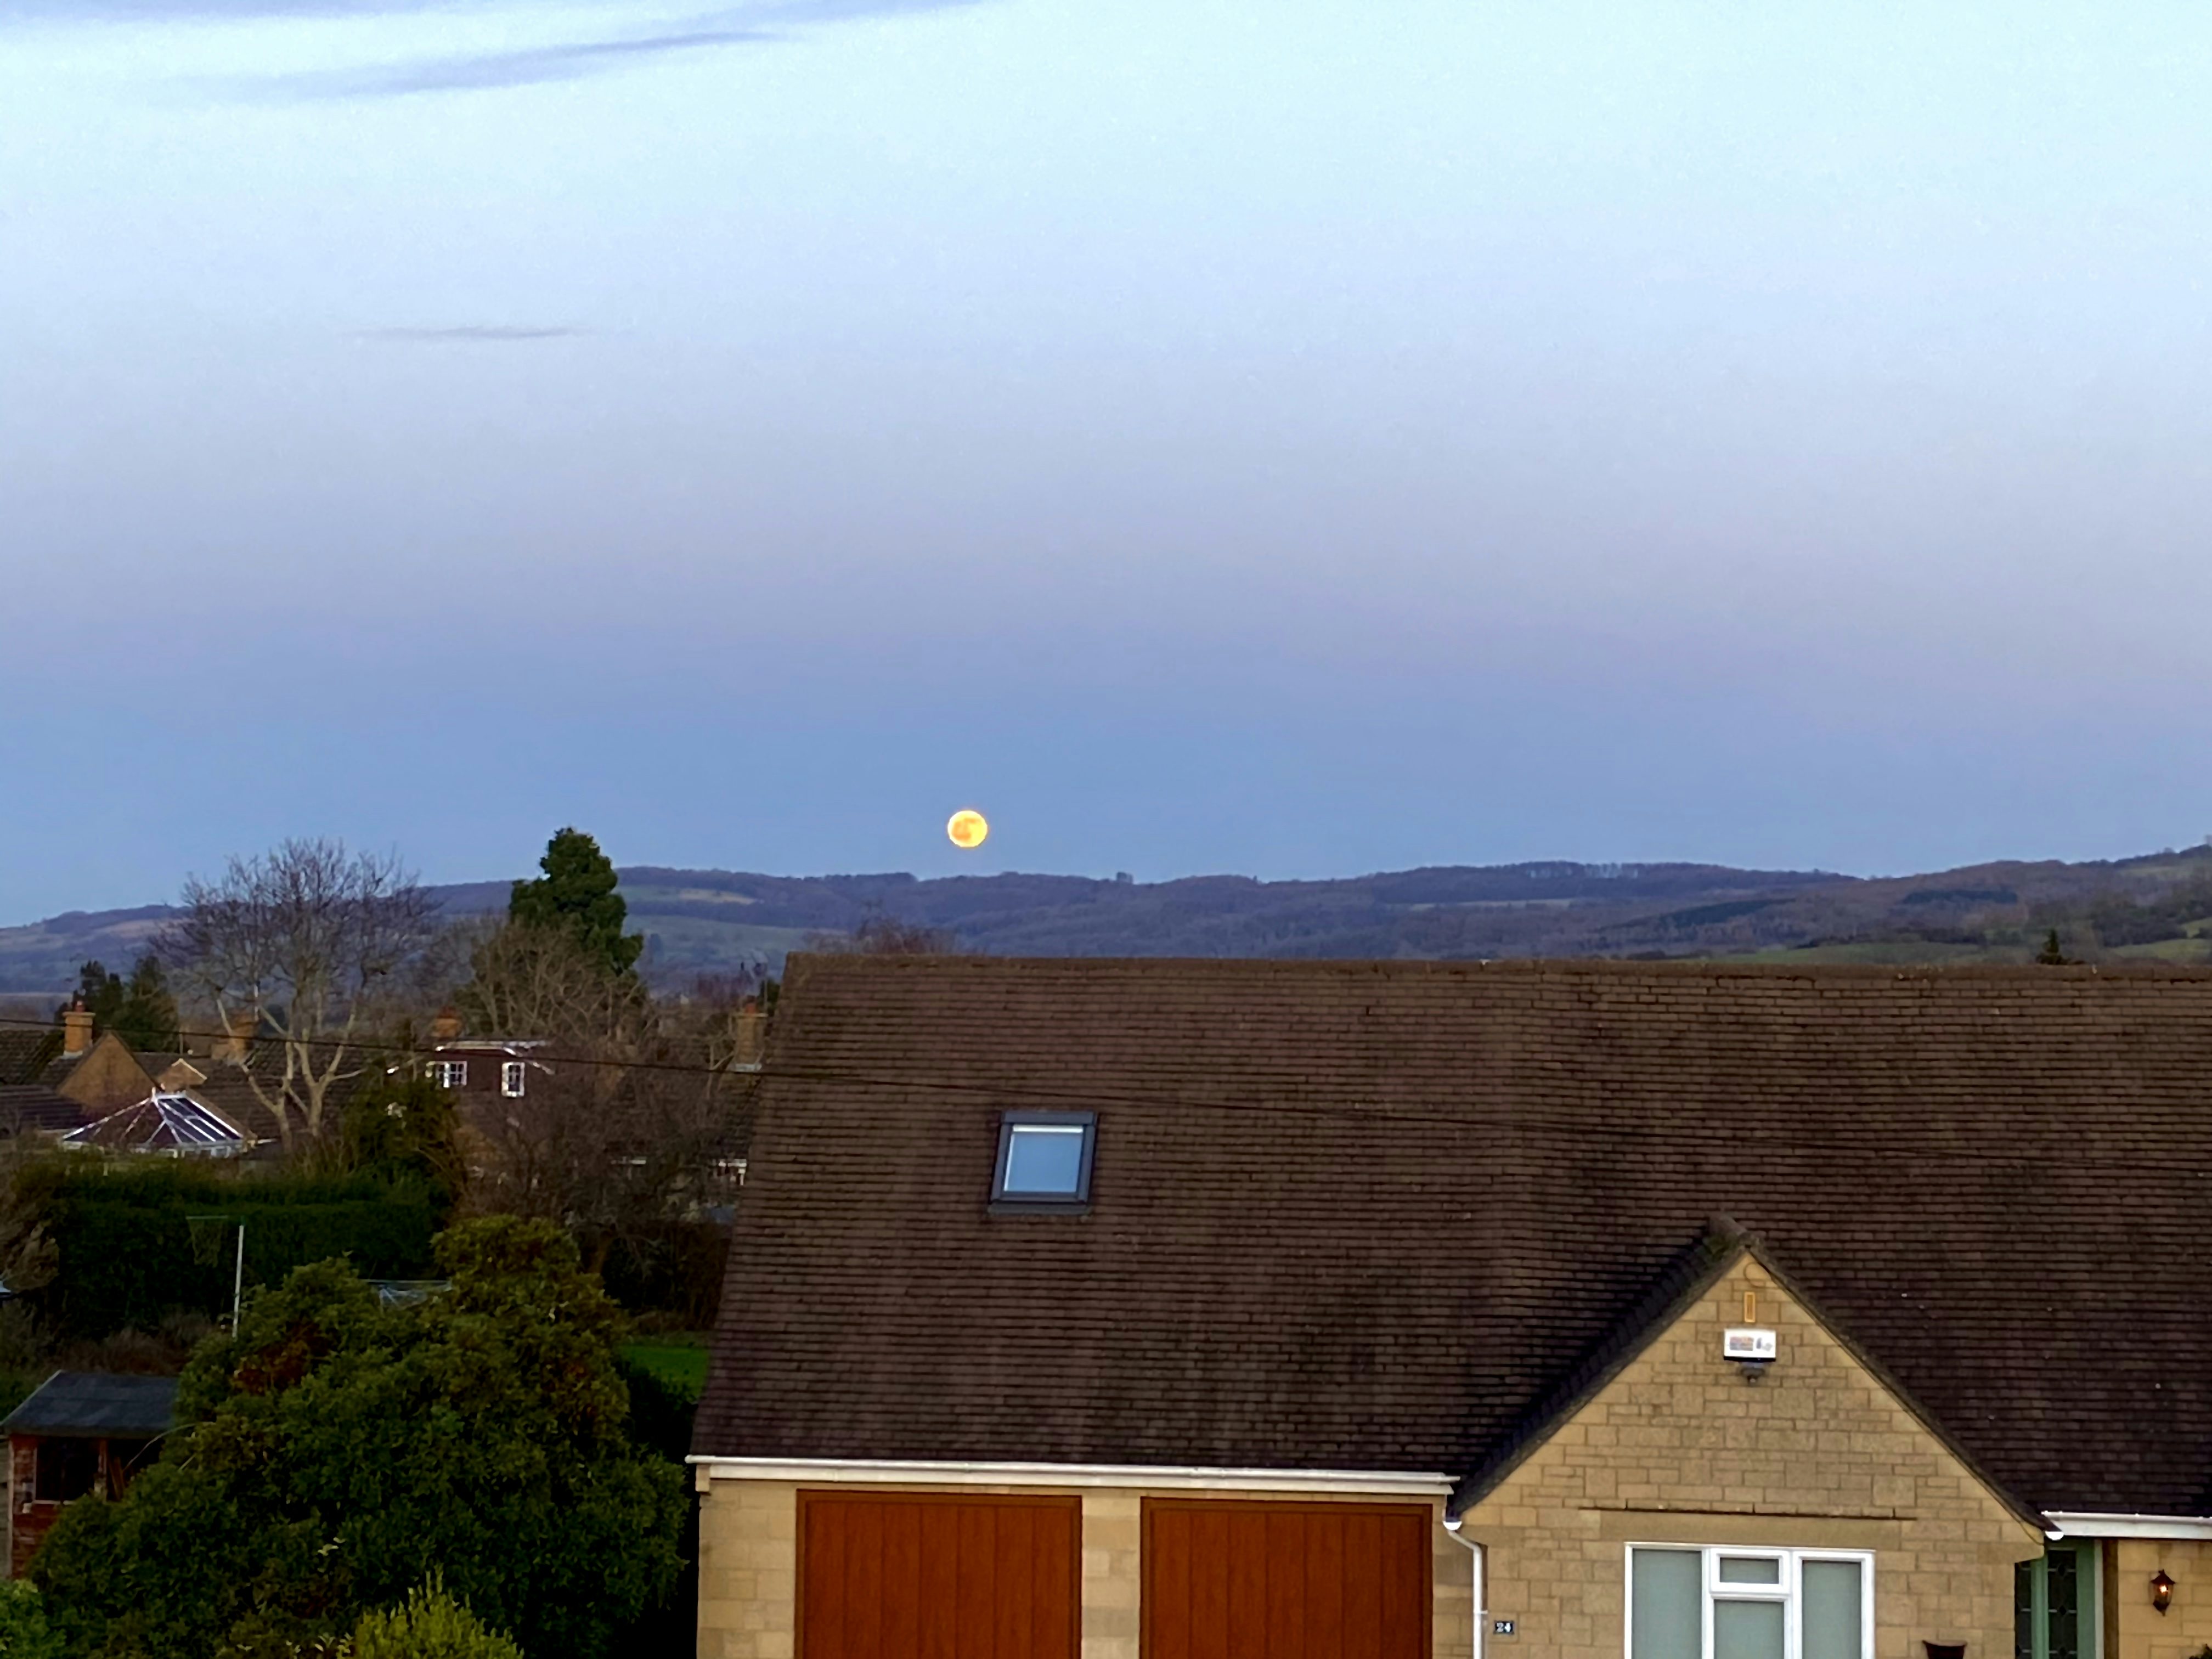 A very bright, orange moon rises up over some houses and the hills of Gloucestershire